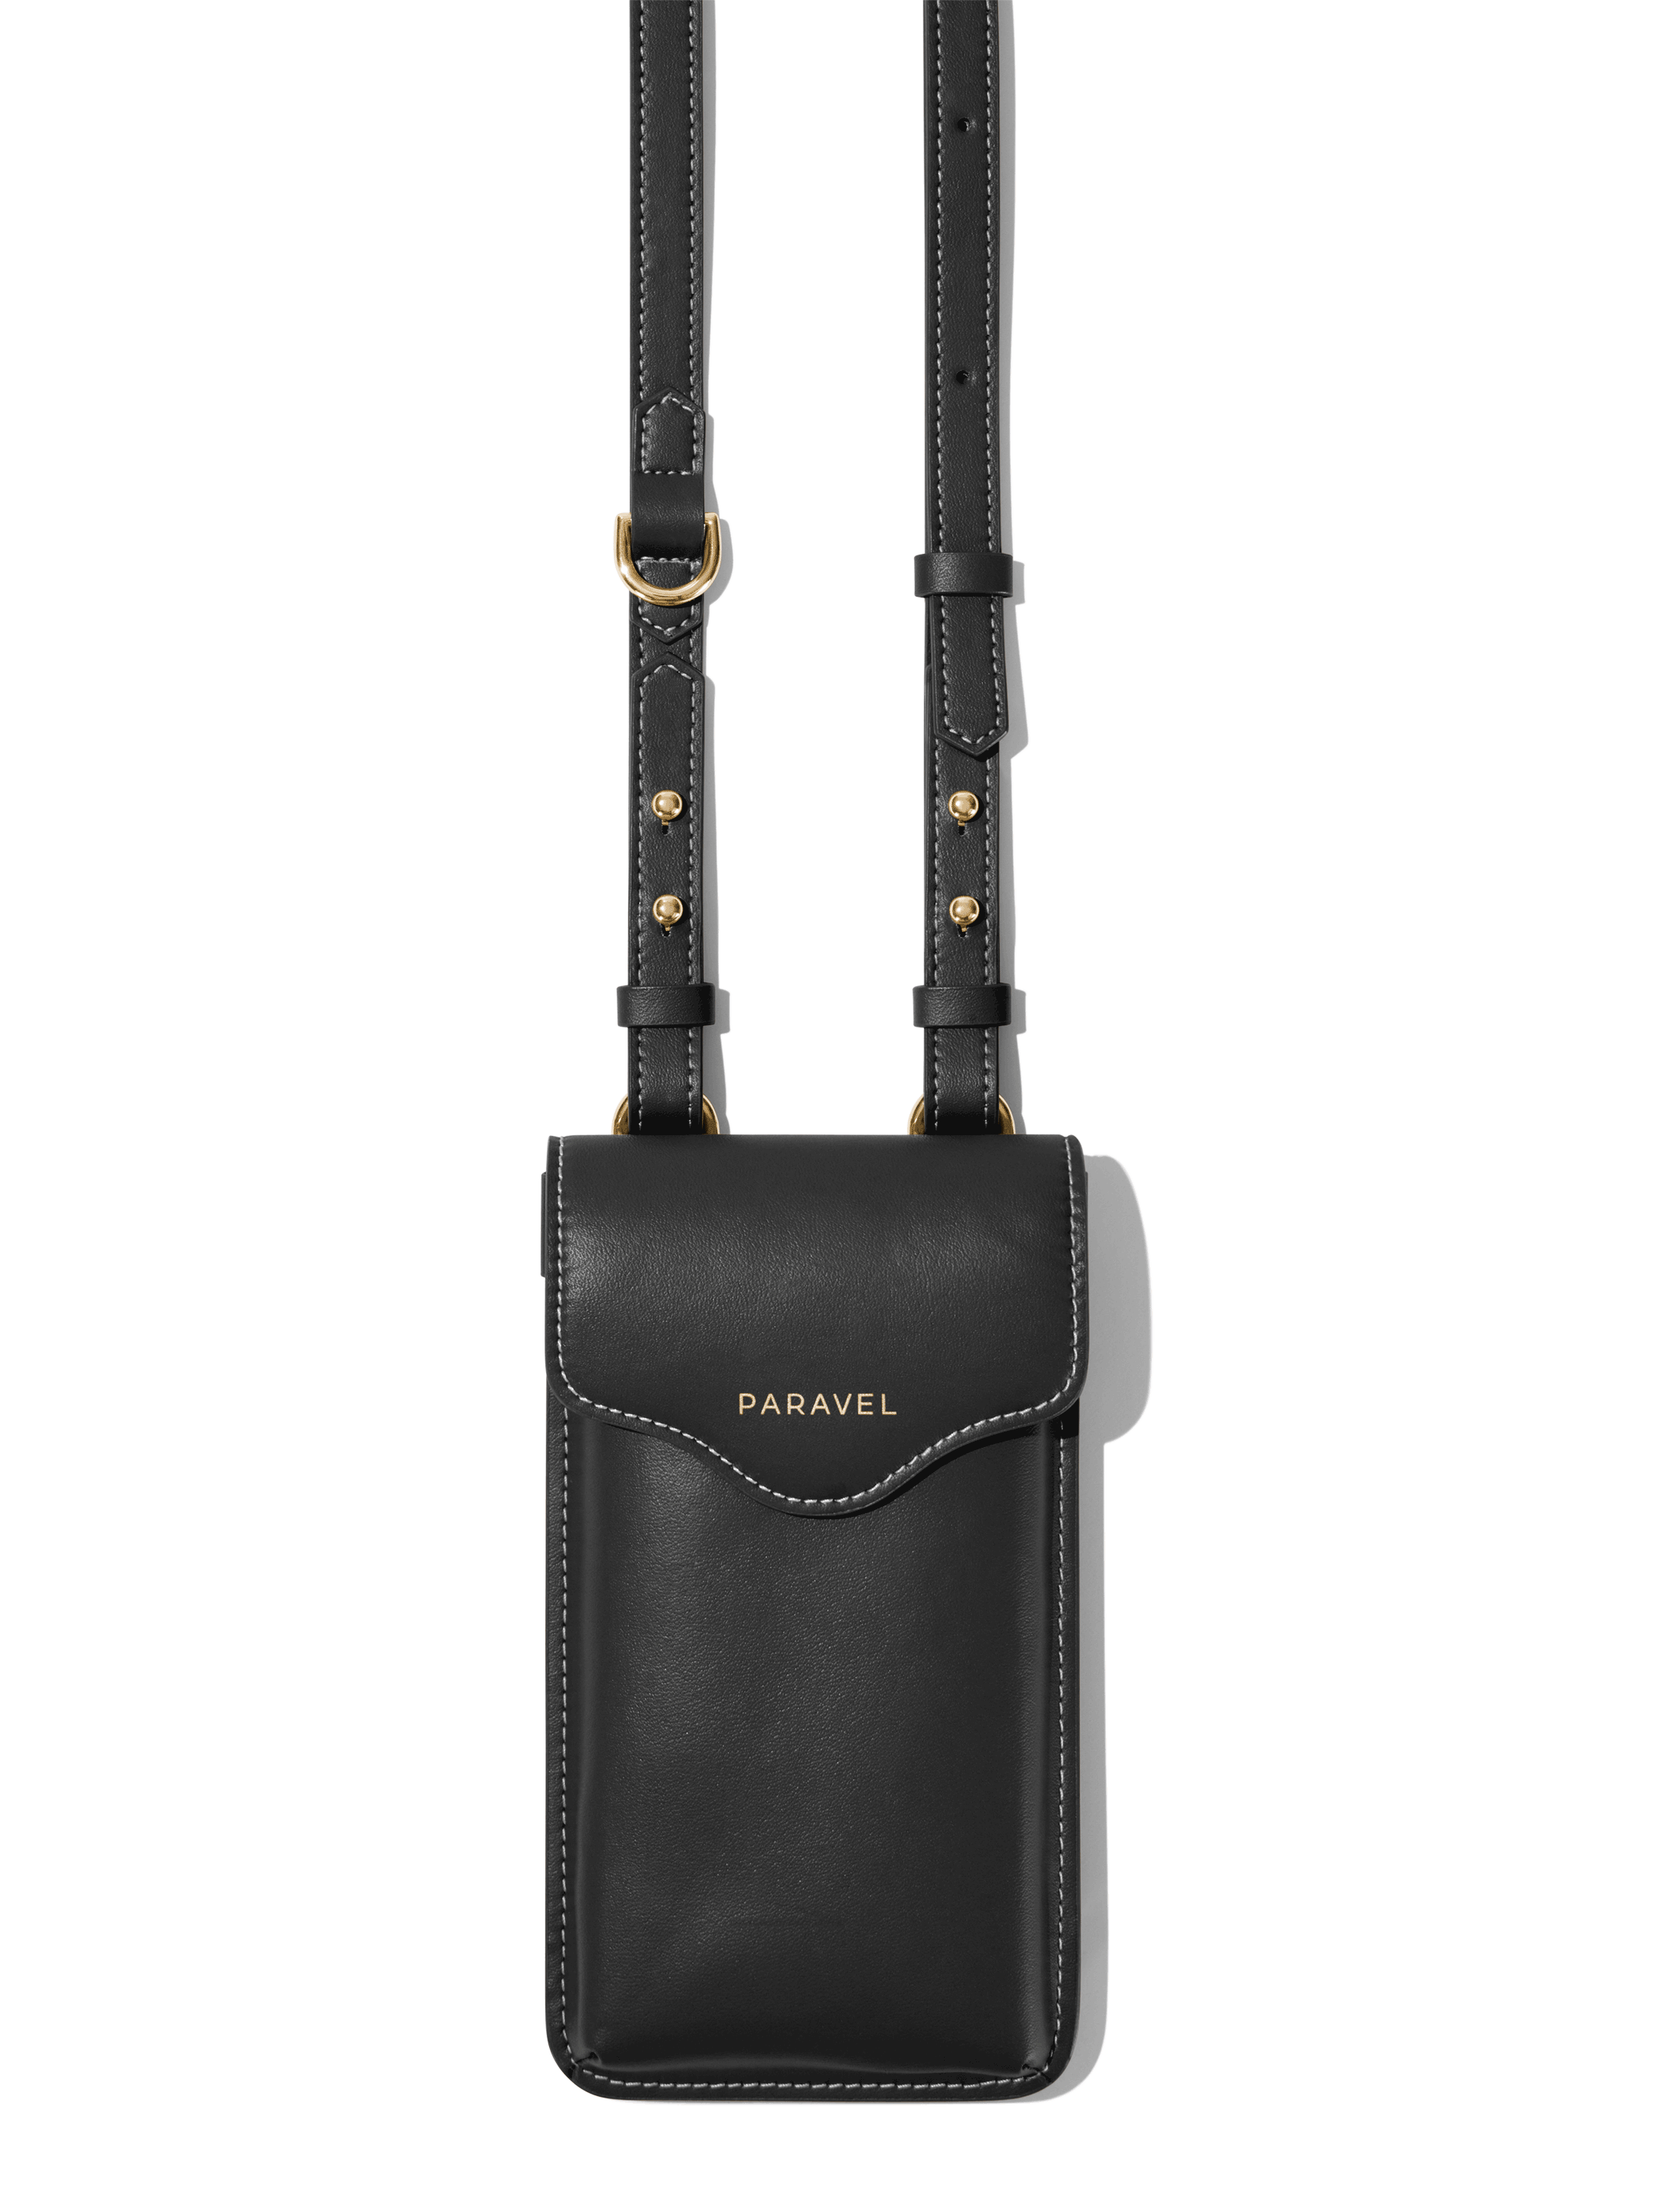 Fashionable, functional, crossbody phone straps – Woman On The Move